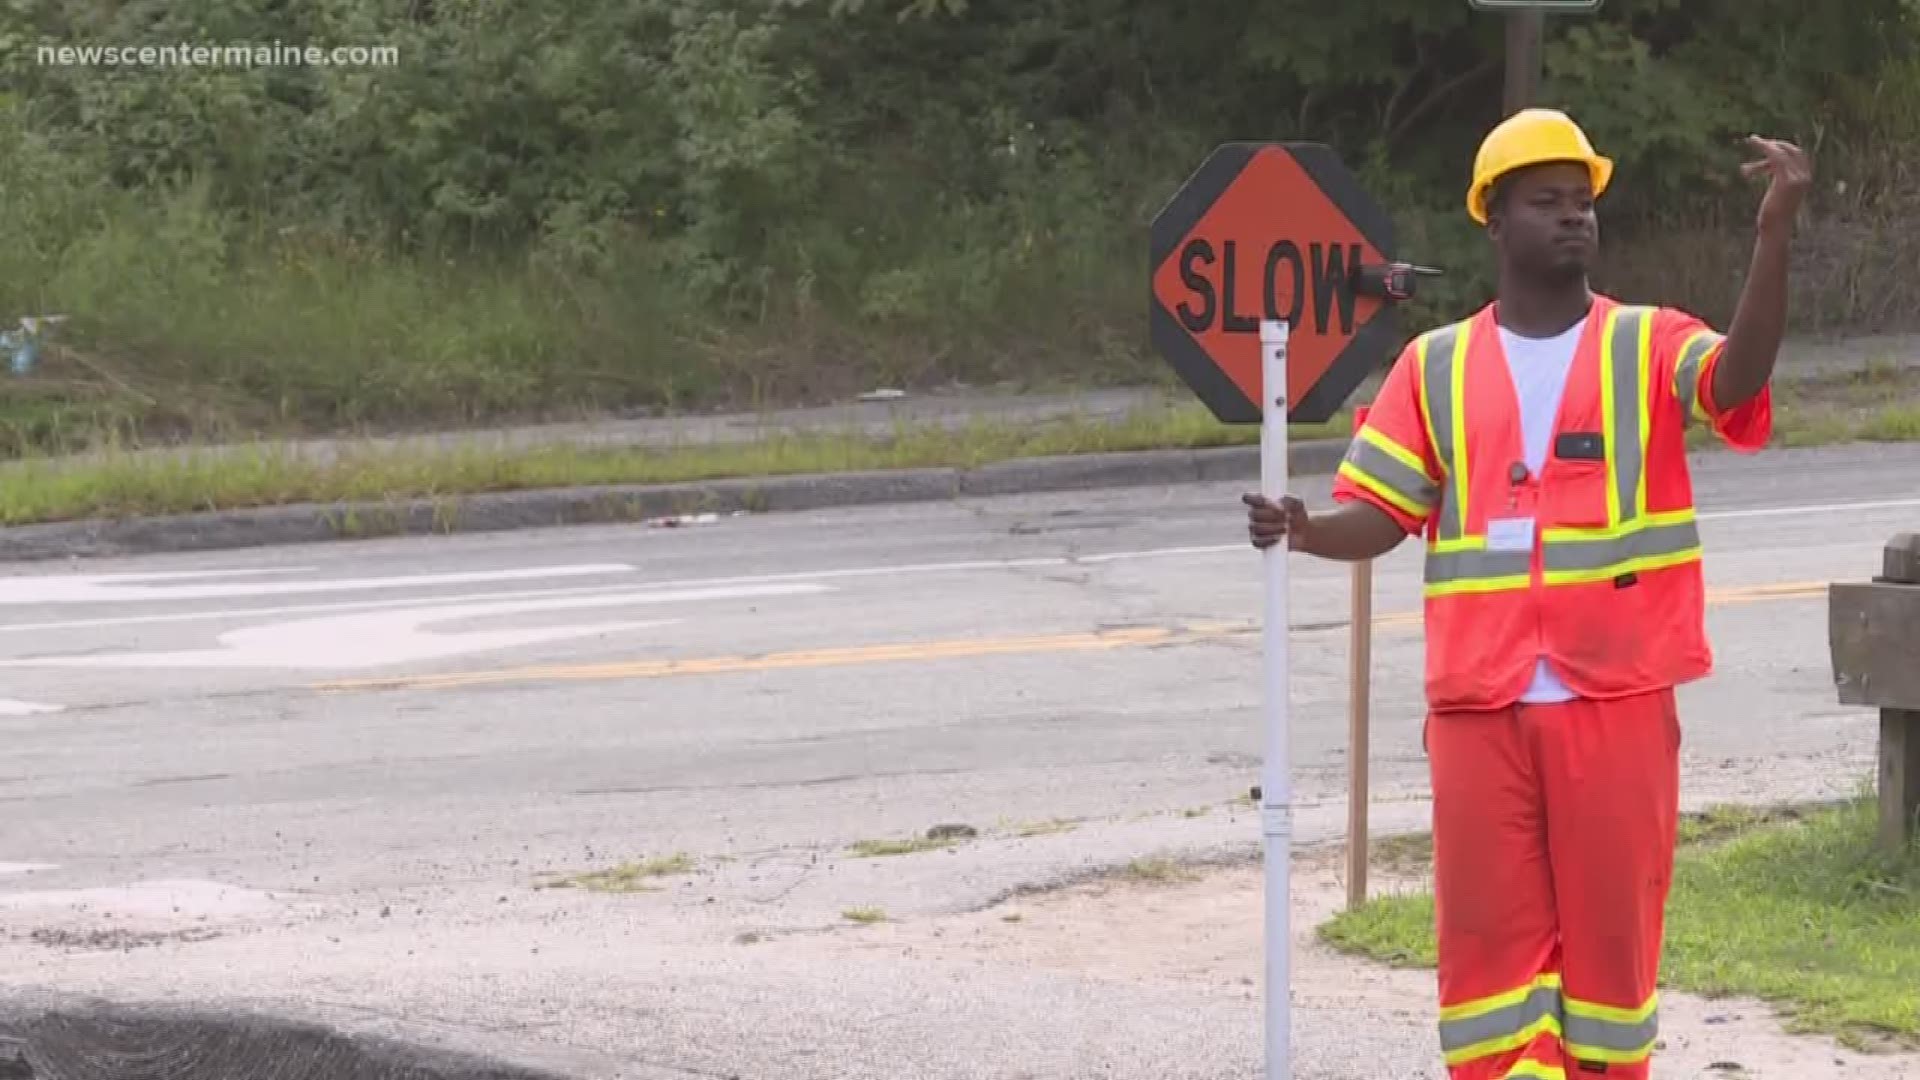 Good economy causes shortage of flaggers